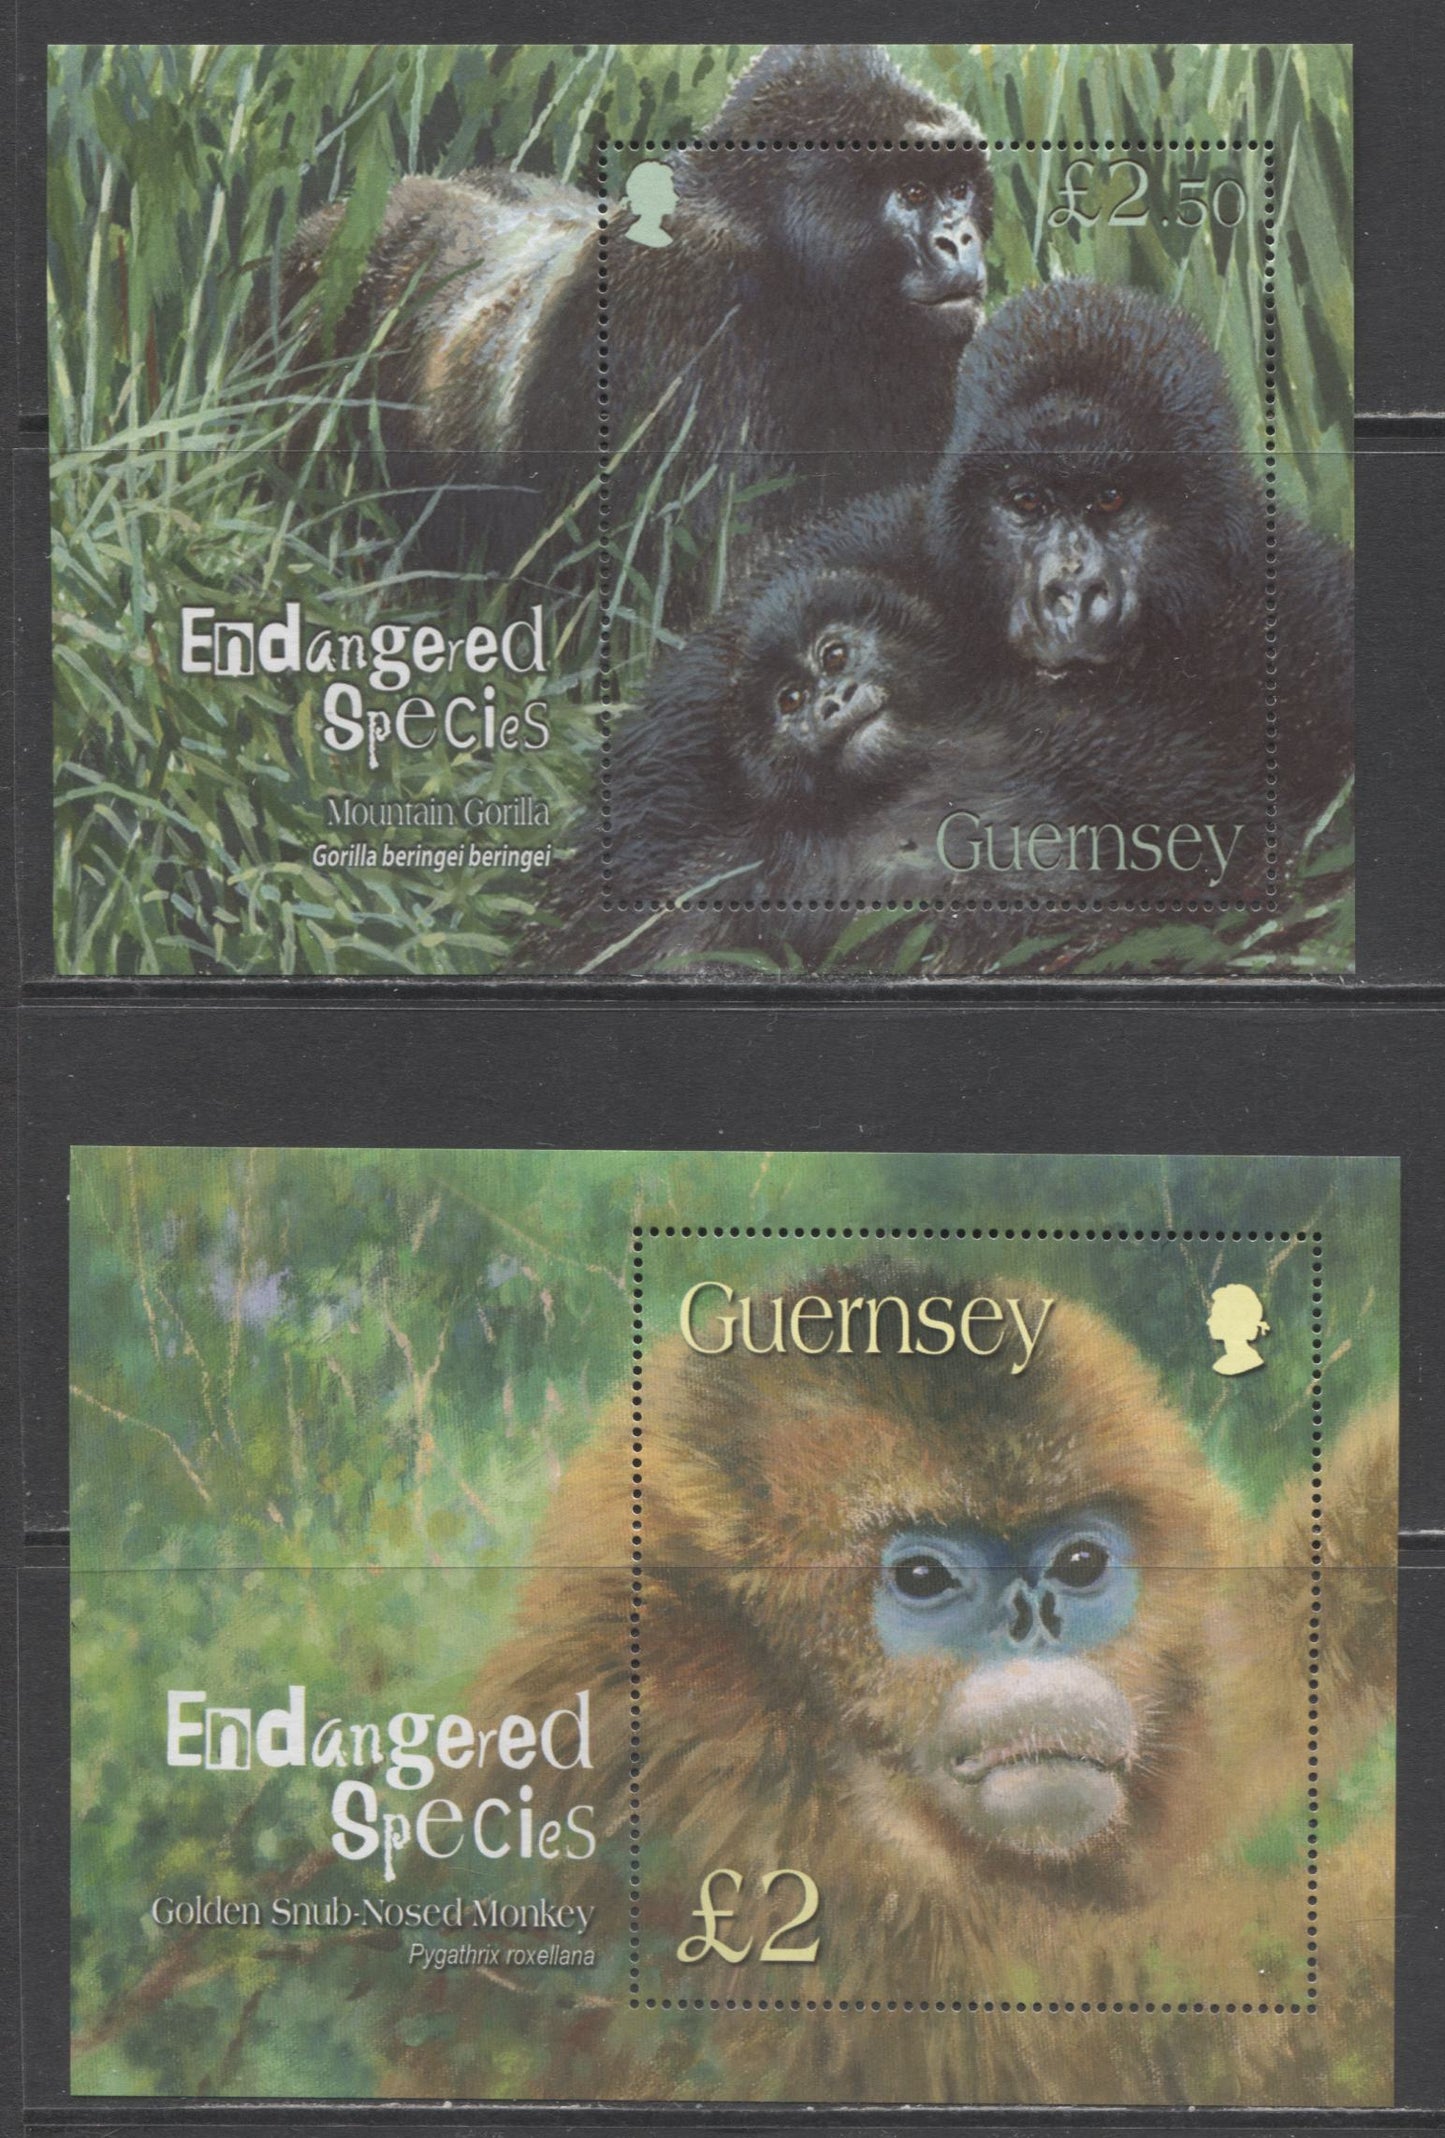 Lot 31 Great Britain - Guernsey SC#816/952 2004-2007 Endangered Species Issues, 2 VFNH Souvenir Sheets, Click on Listing to See ALL Pictures, 2017 Scott Cat. $16.5